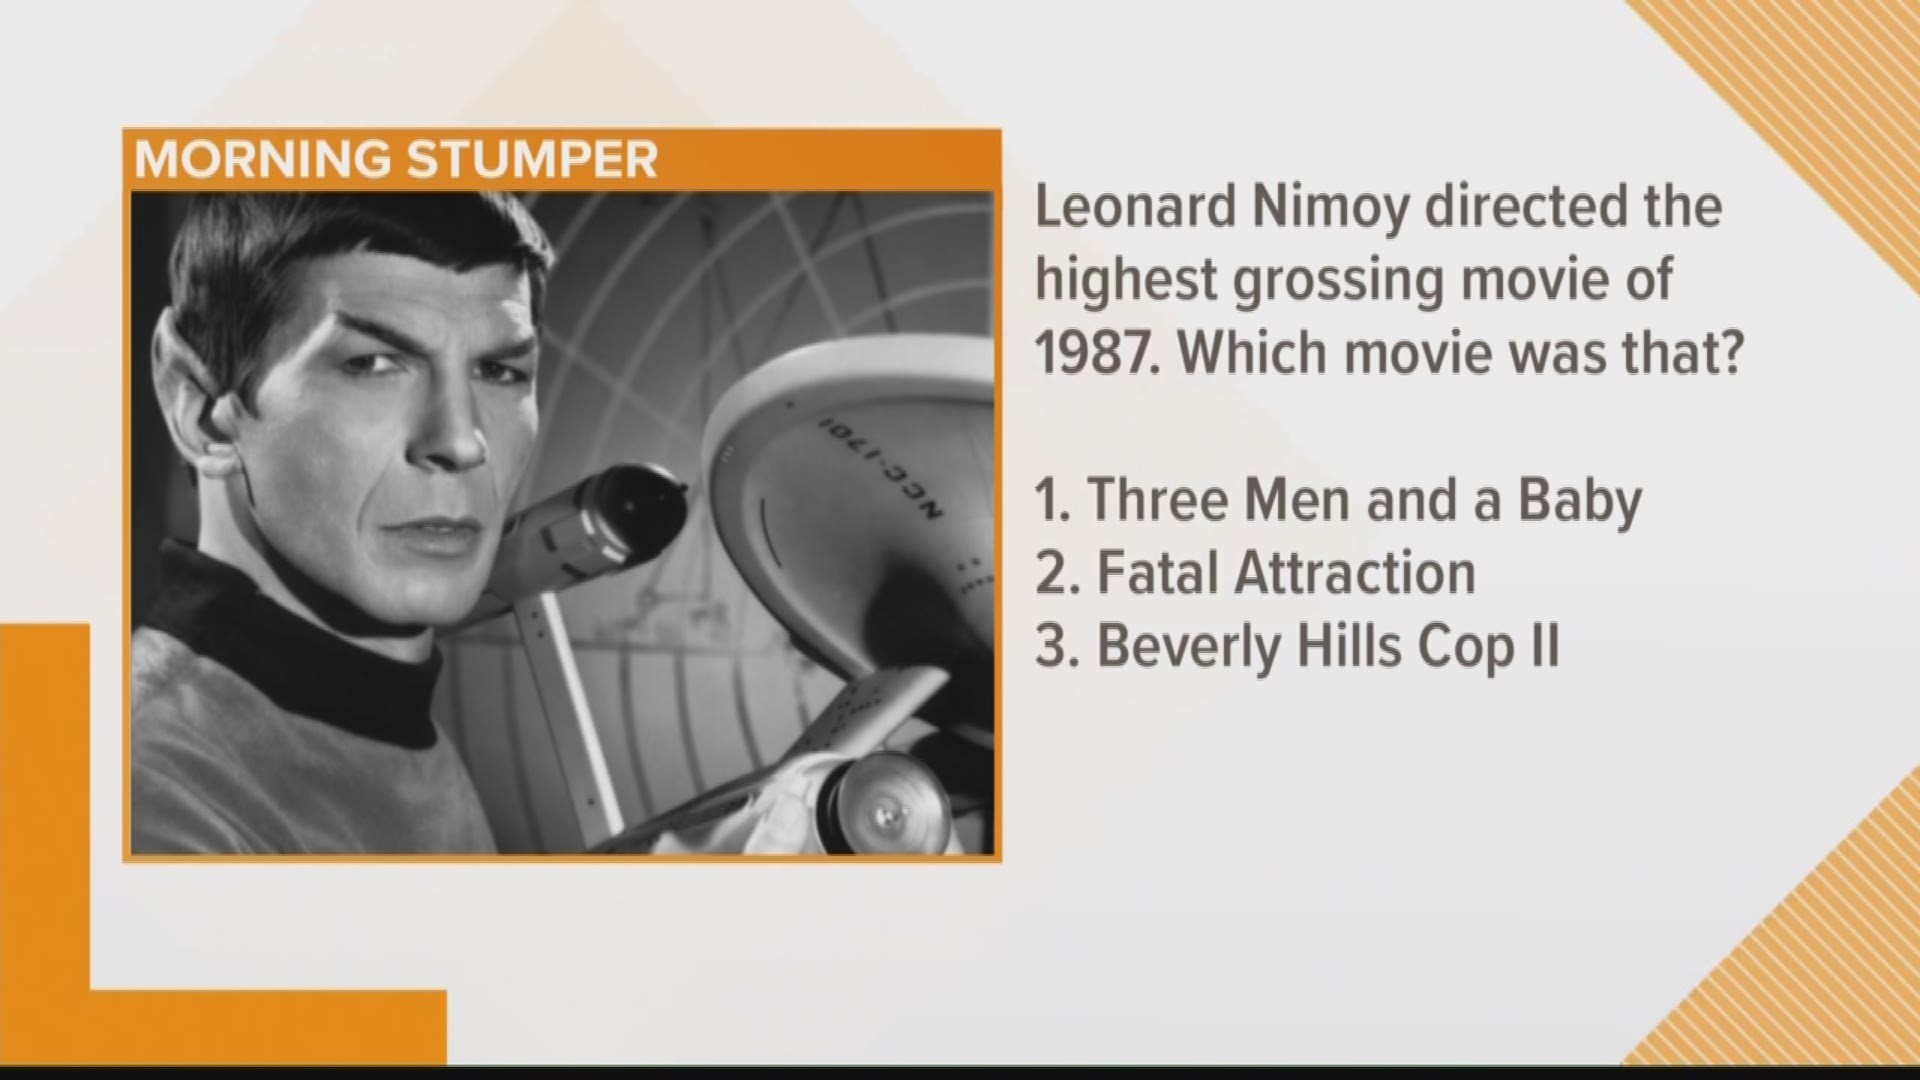 Leonard Nimoy directed the highest grossing movie of 1987. Which movie was that?